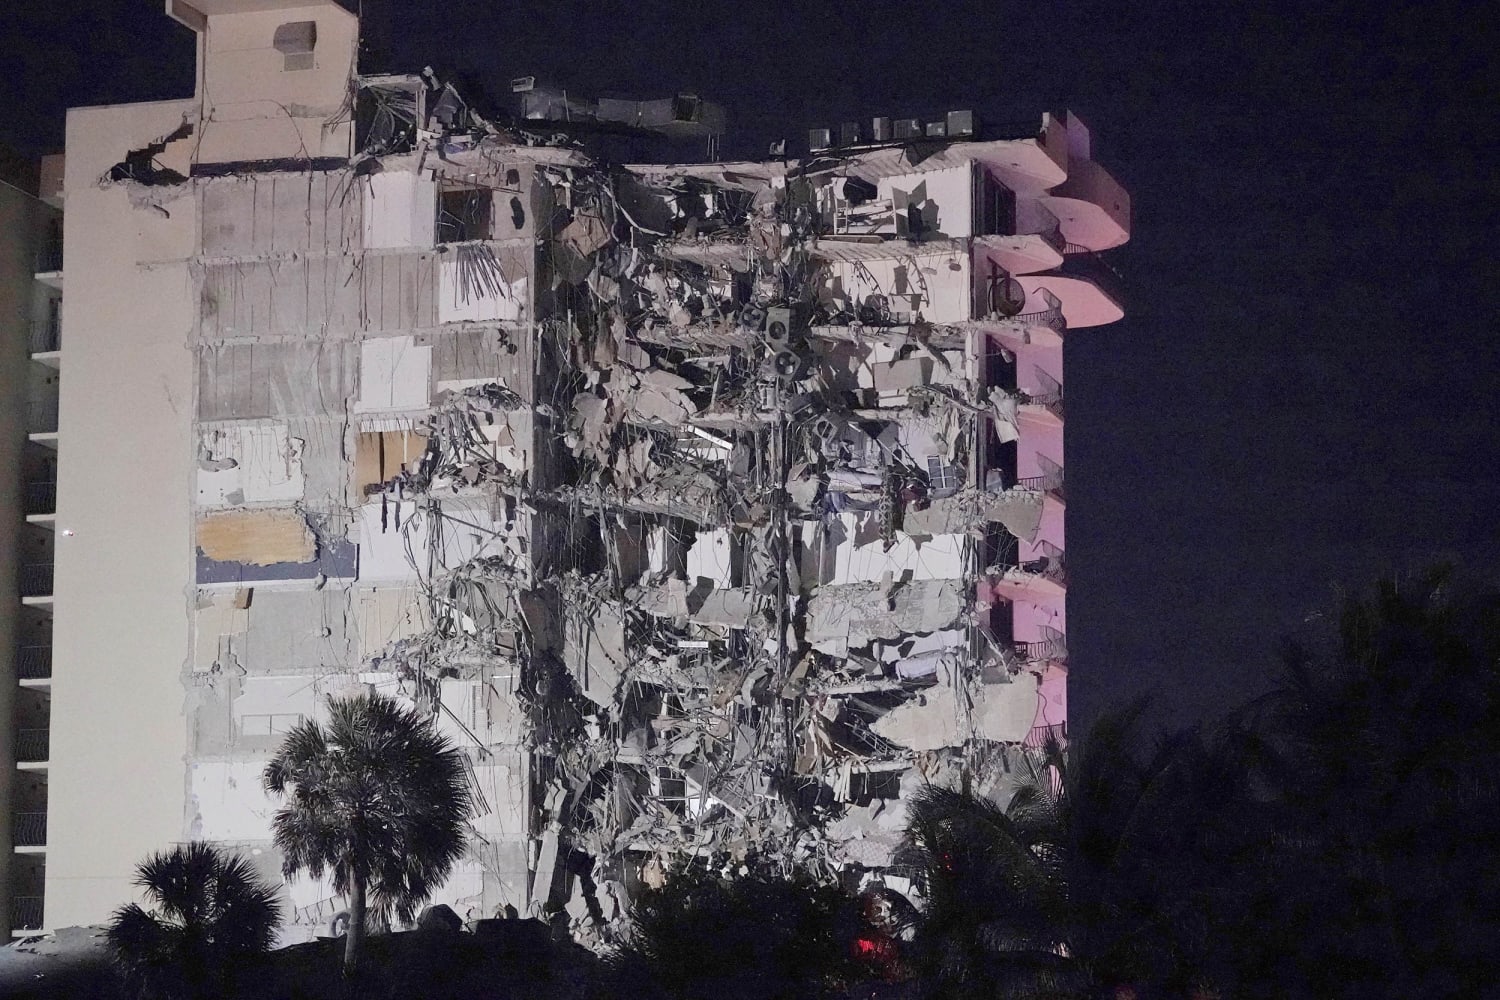 At least 1 dead after high-rise condo building partially collapses near  Miami Beach